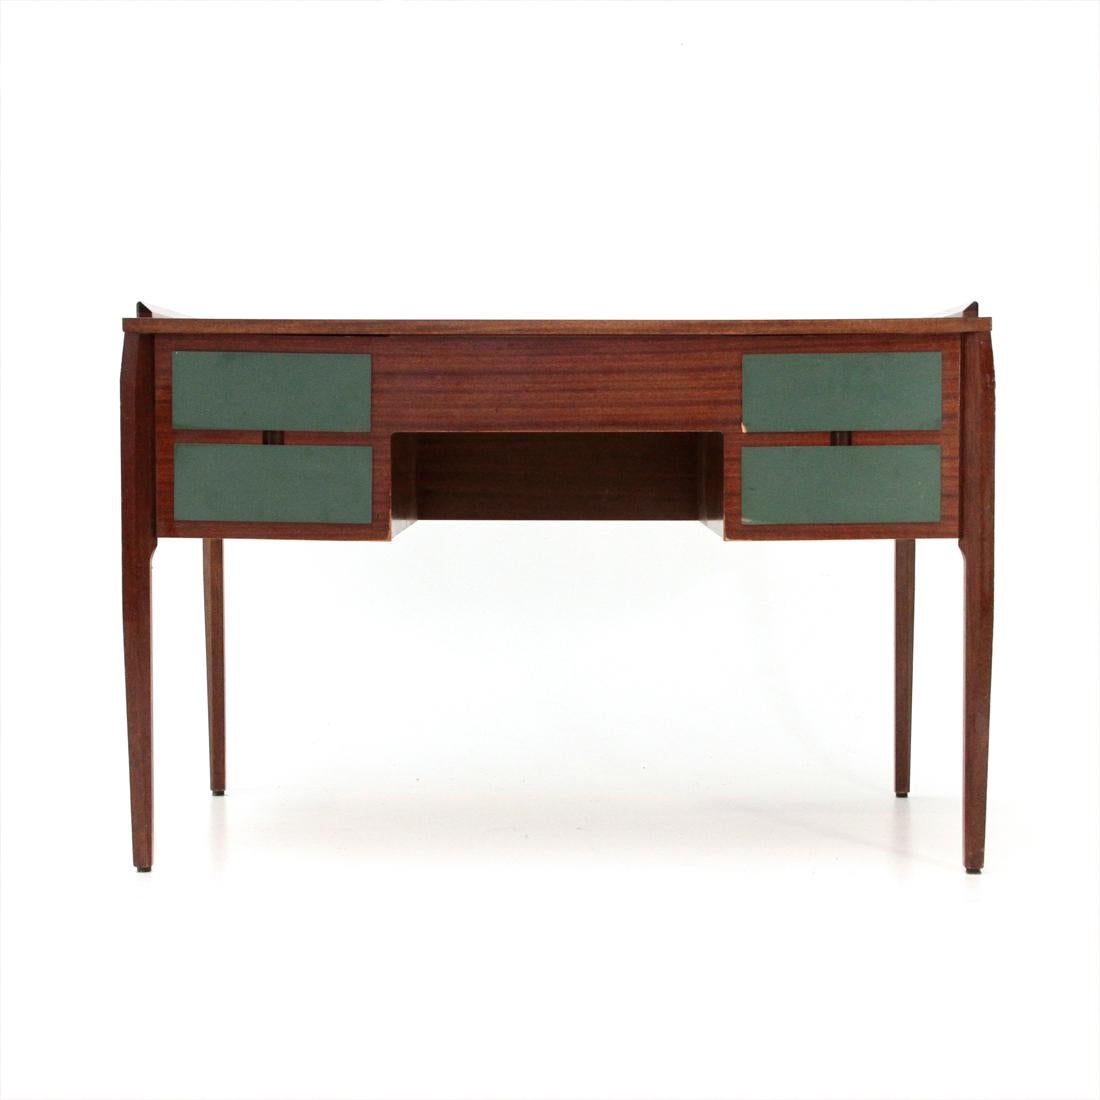 Italian manufacturing desk produced in the 1960s.
Teak veneered wood structure.
Top and front of the drawers veneered in green ant.
Teak legs cut in jade.
Good general conditions, some signs and lack of ant on the drawers due to normal use over